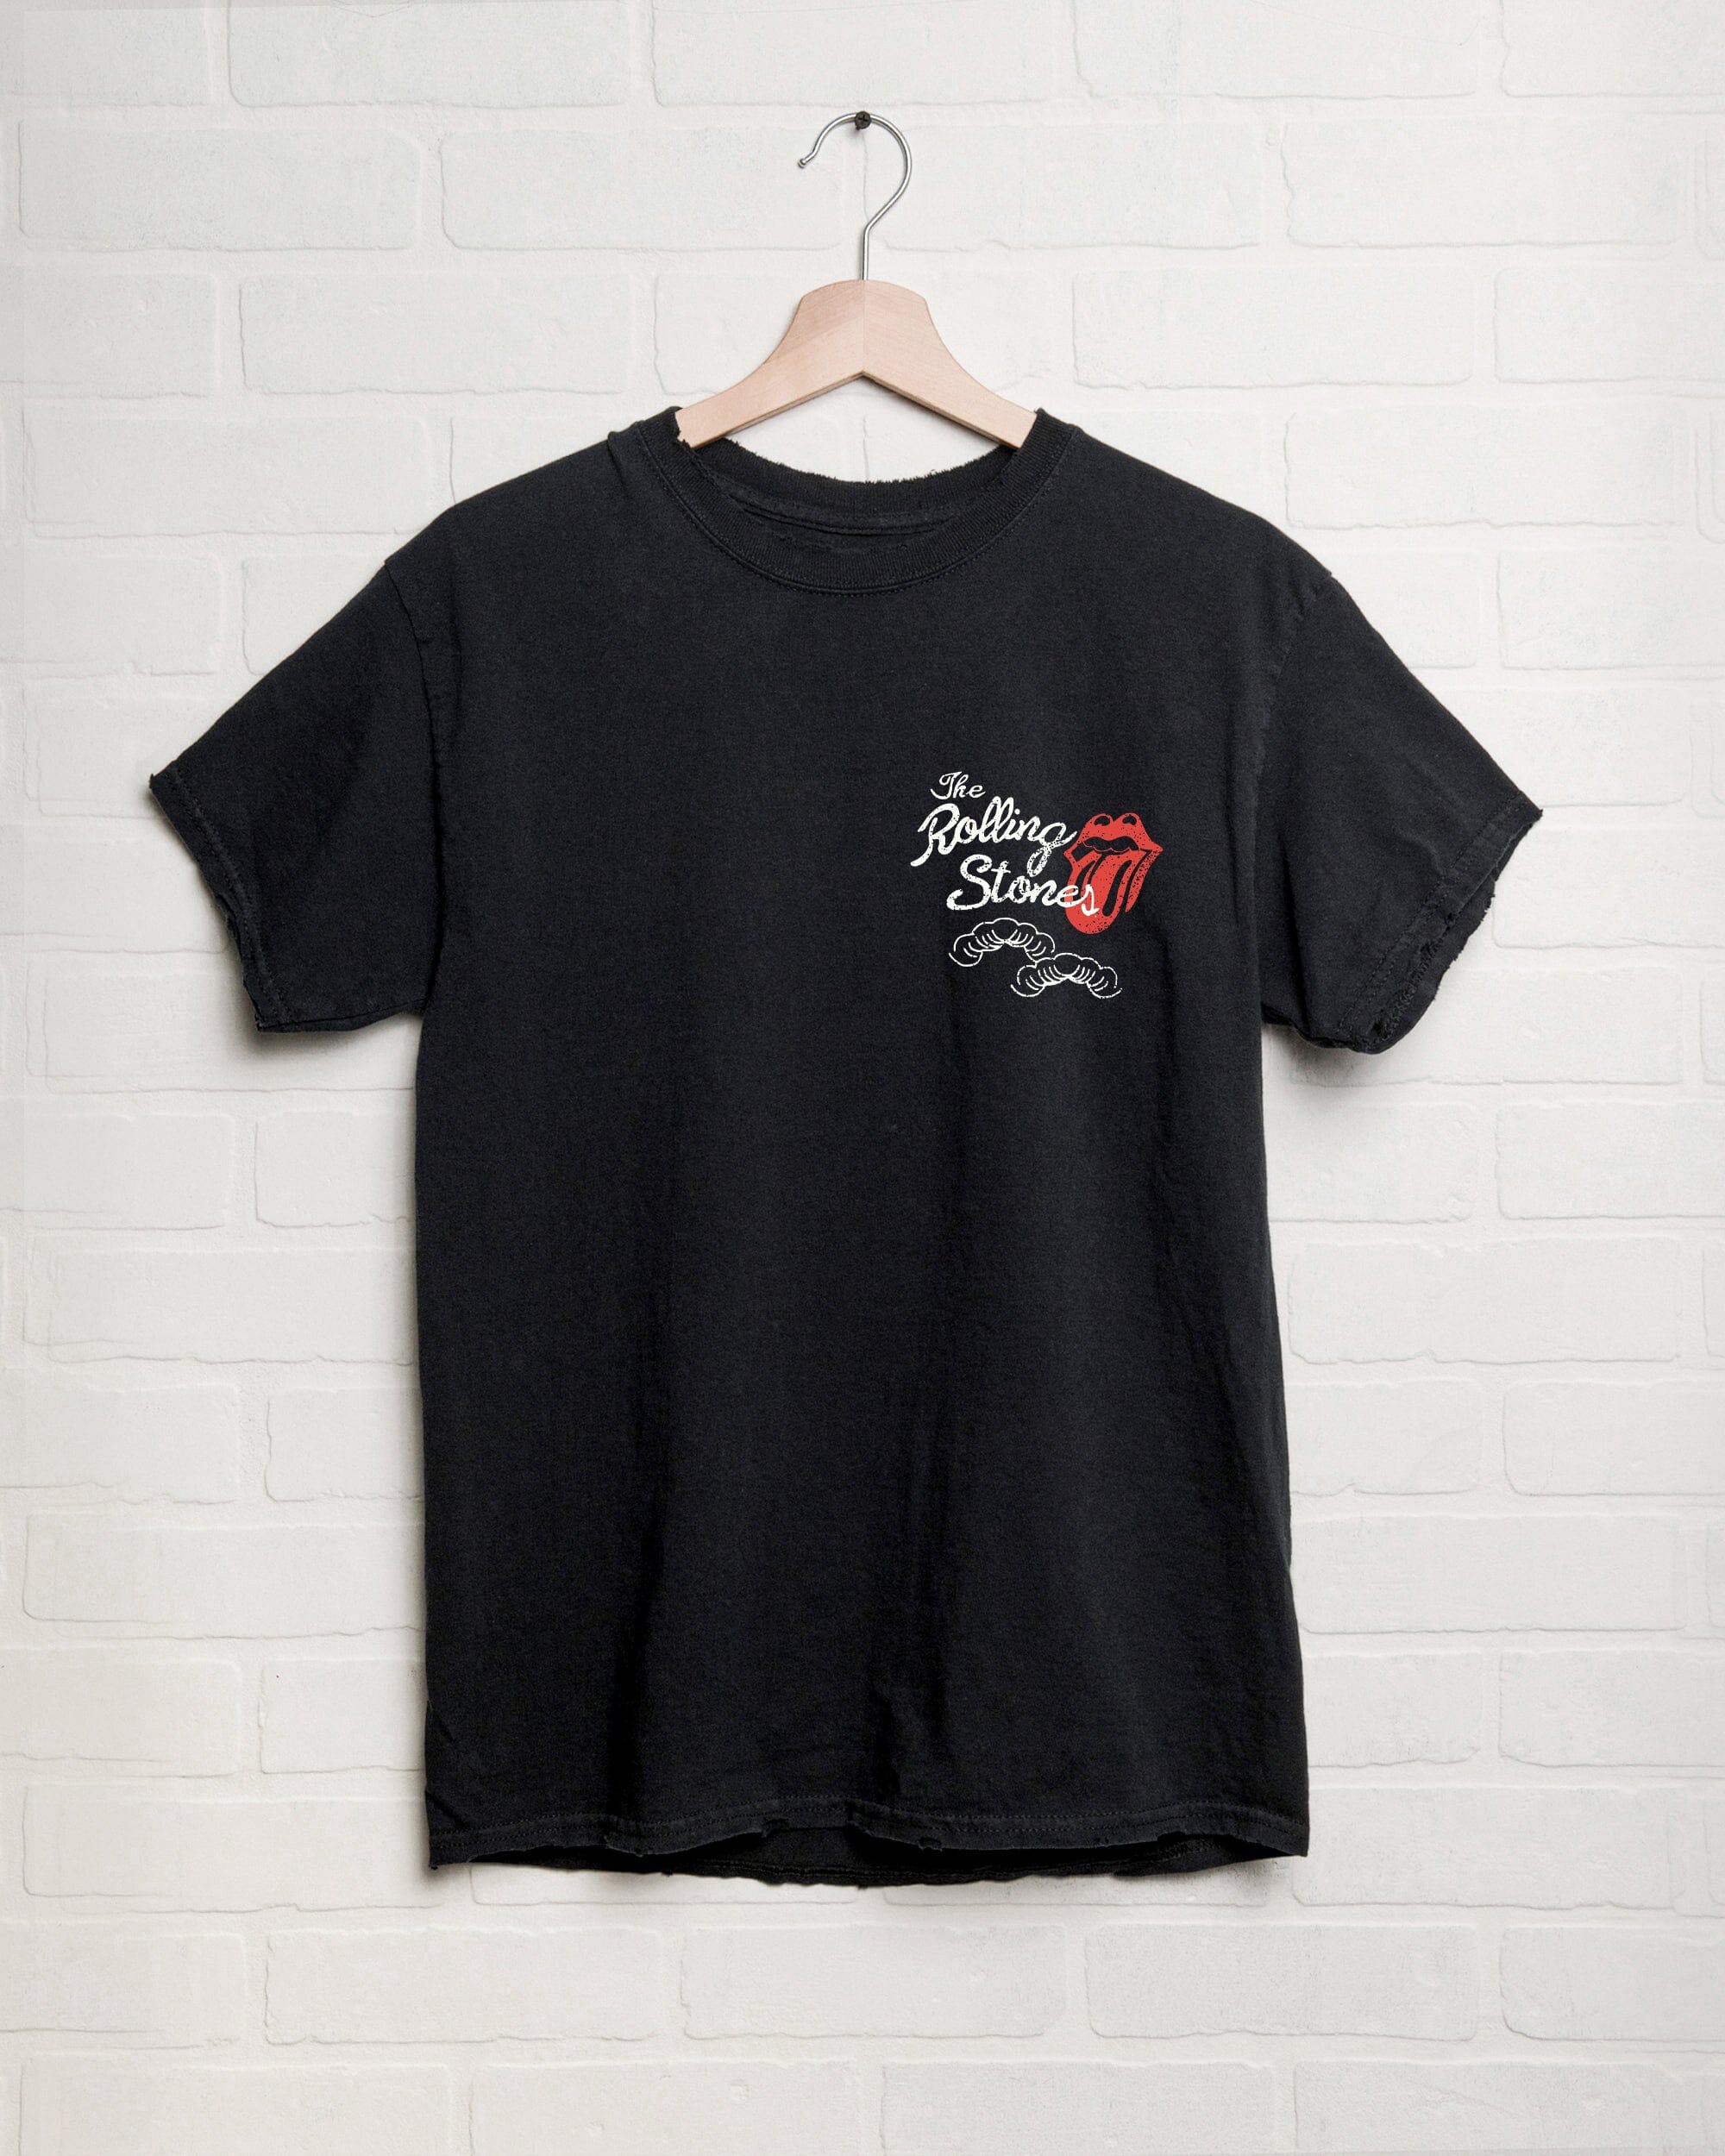 Rolling Stones Japan 2006 Black Thrifted Distressed Tee